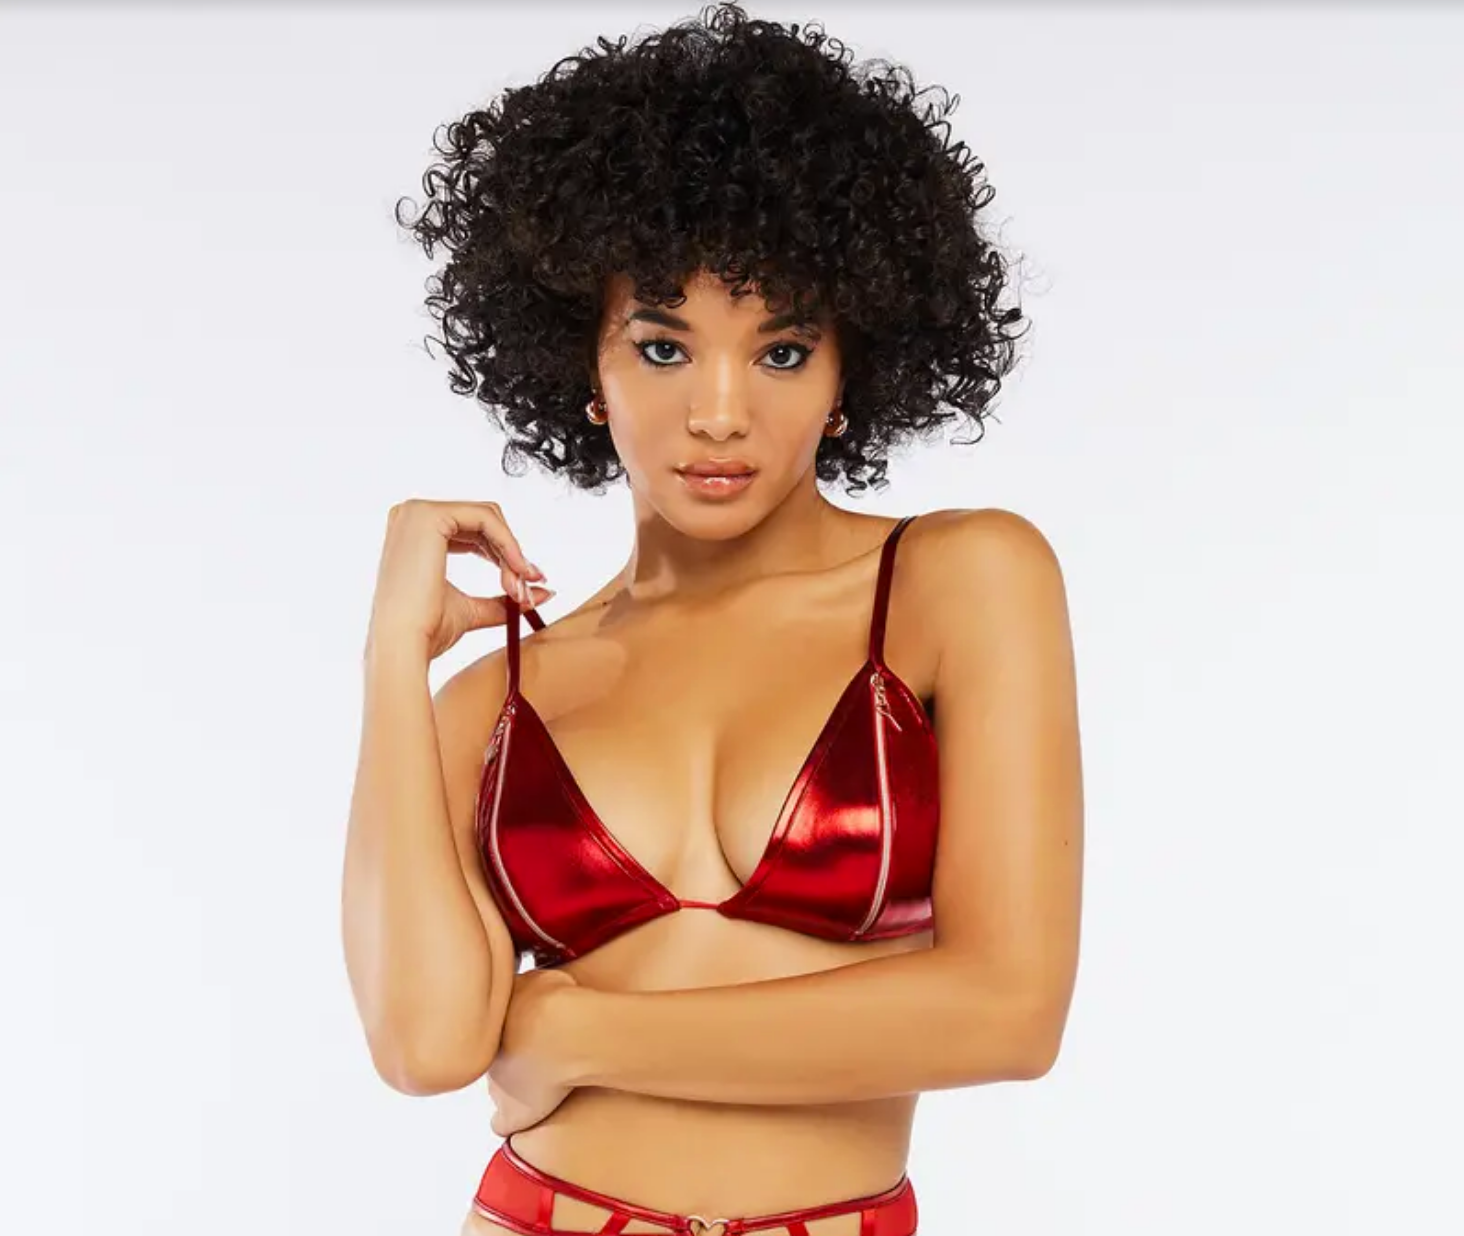 8 Red Lingerie Sets To Look Your Sexiest On Valentine's Day